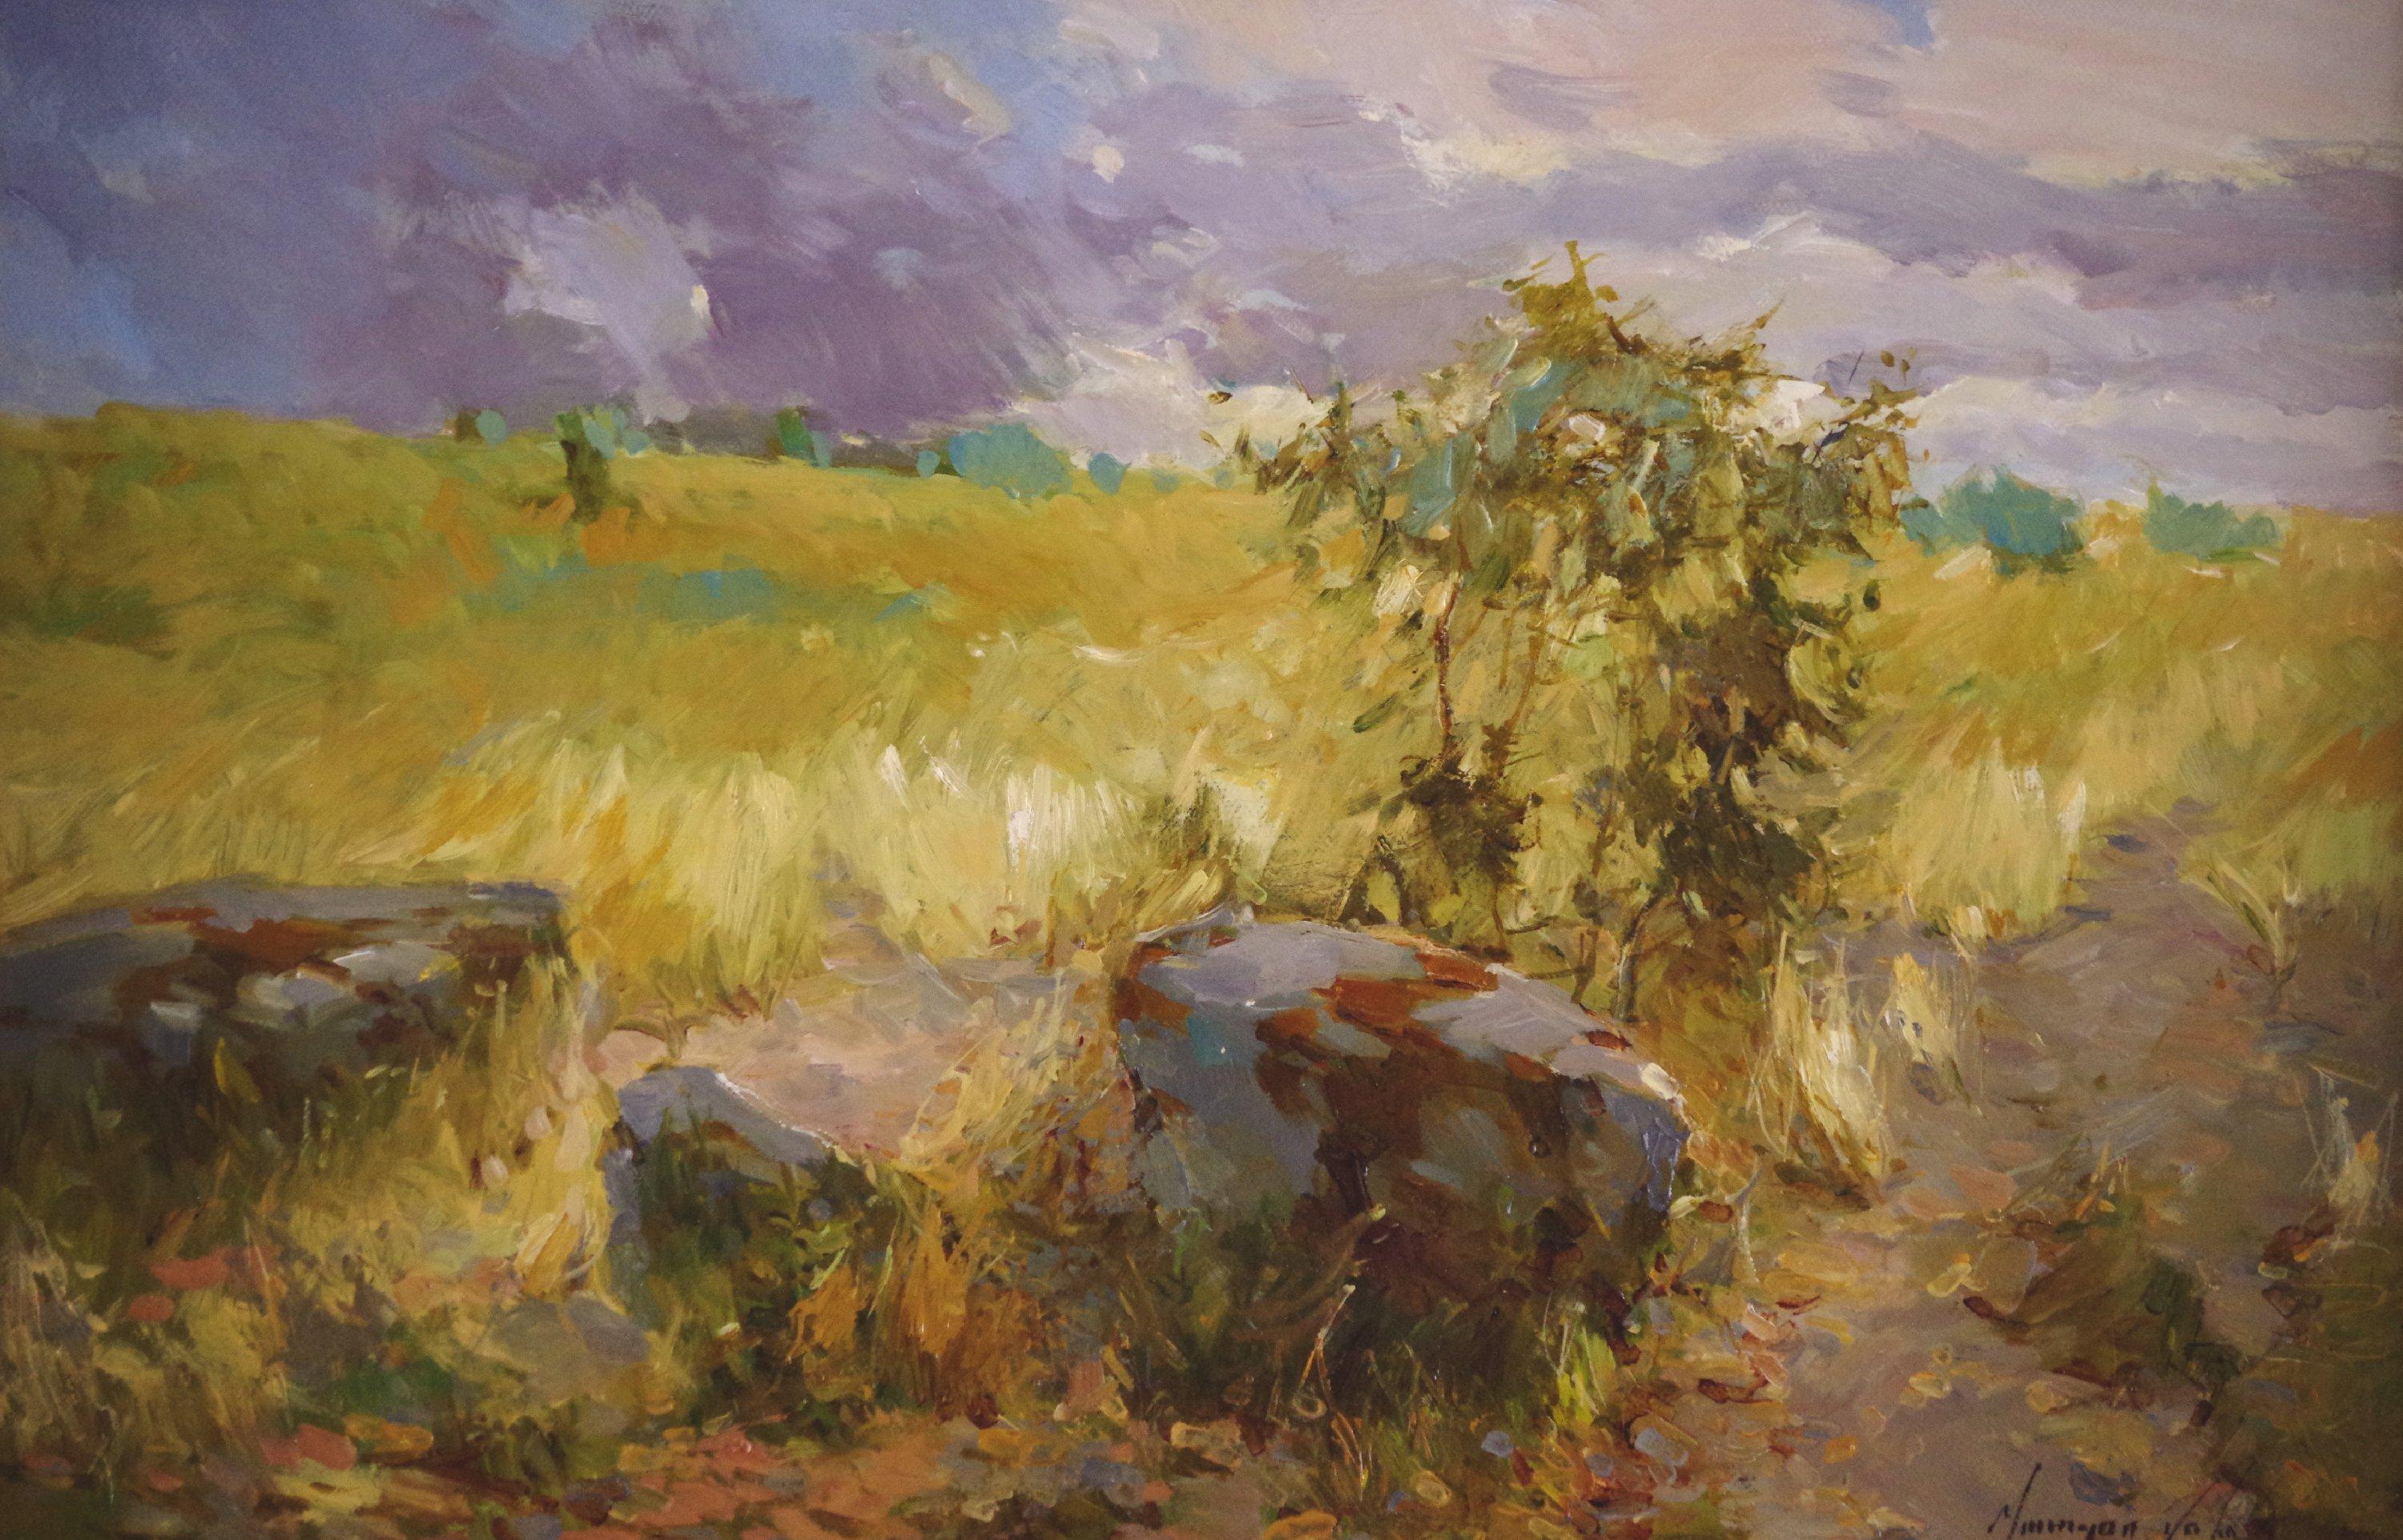 Path Through the Meadow, Original Oil Painting, Ready to Hang - Brown Landscape Painting by Vahe Yeremyan